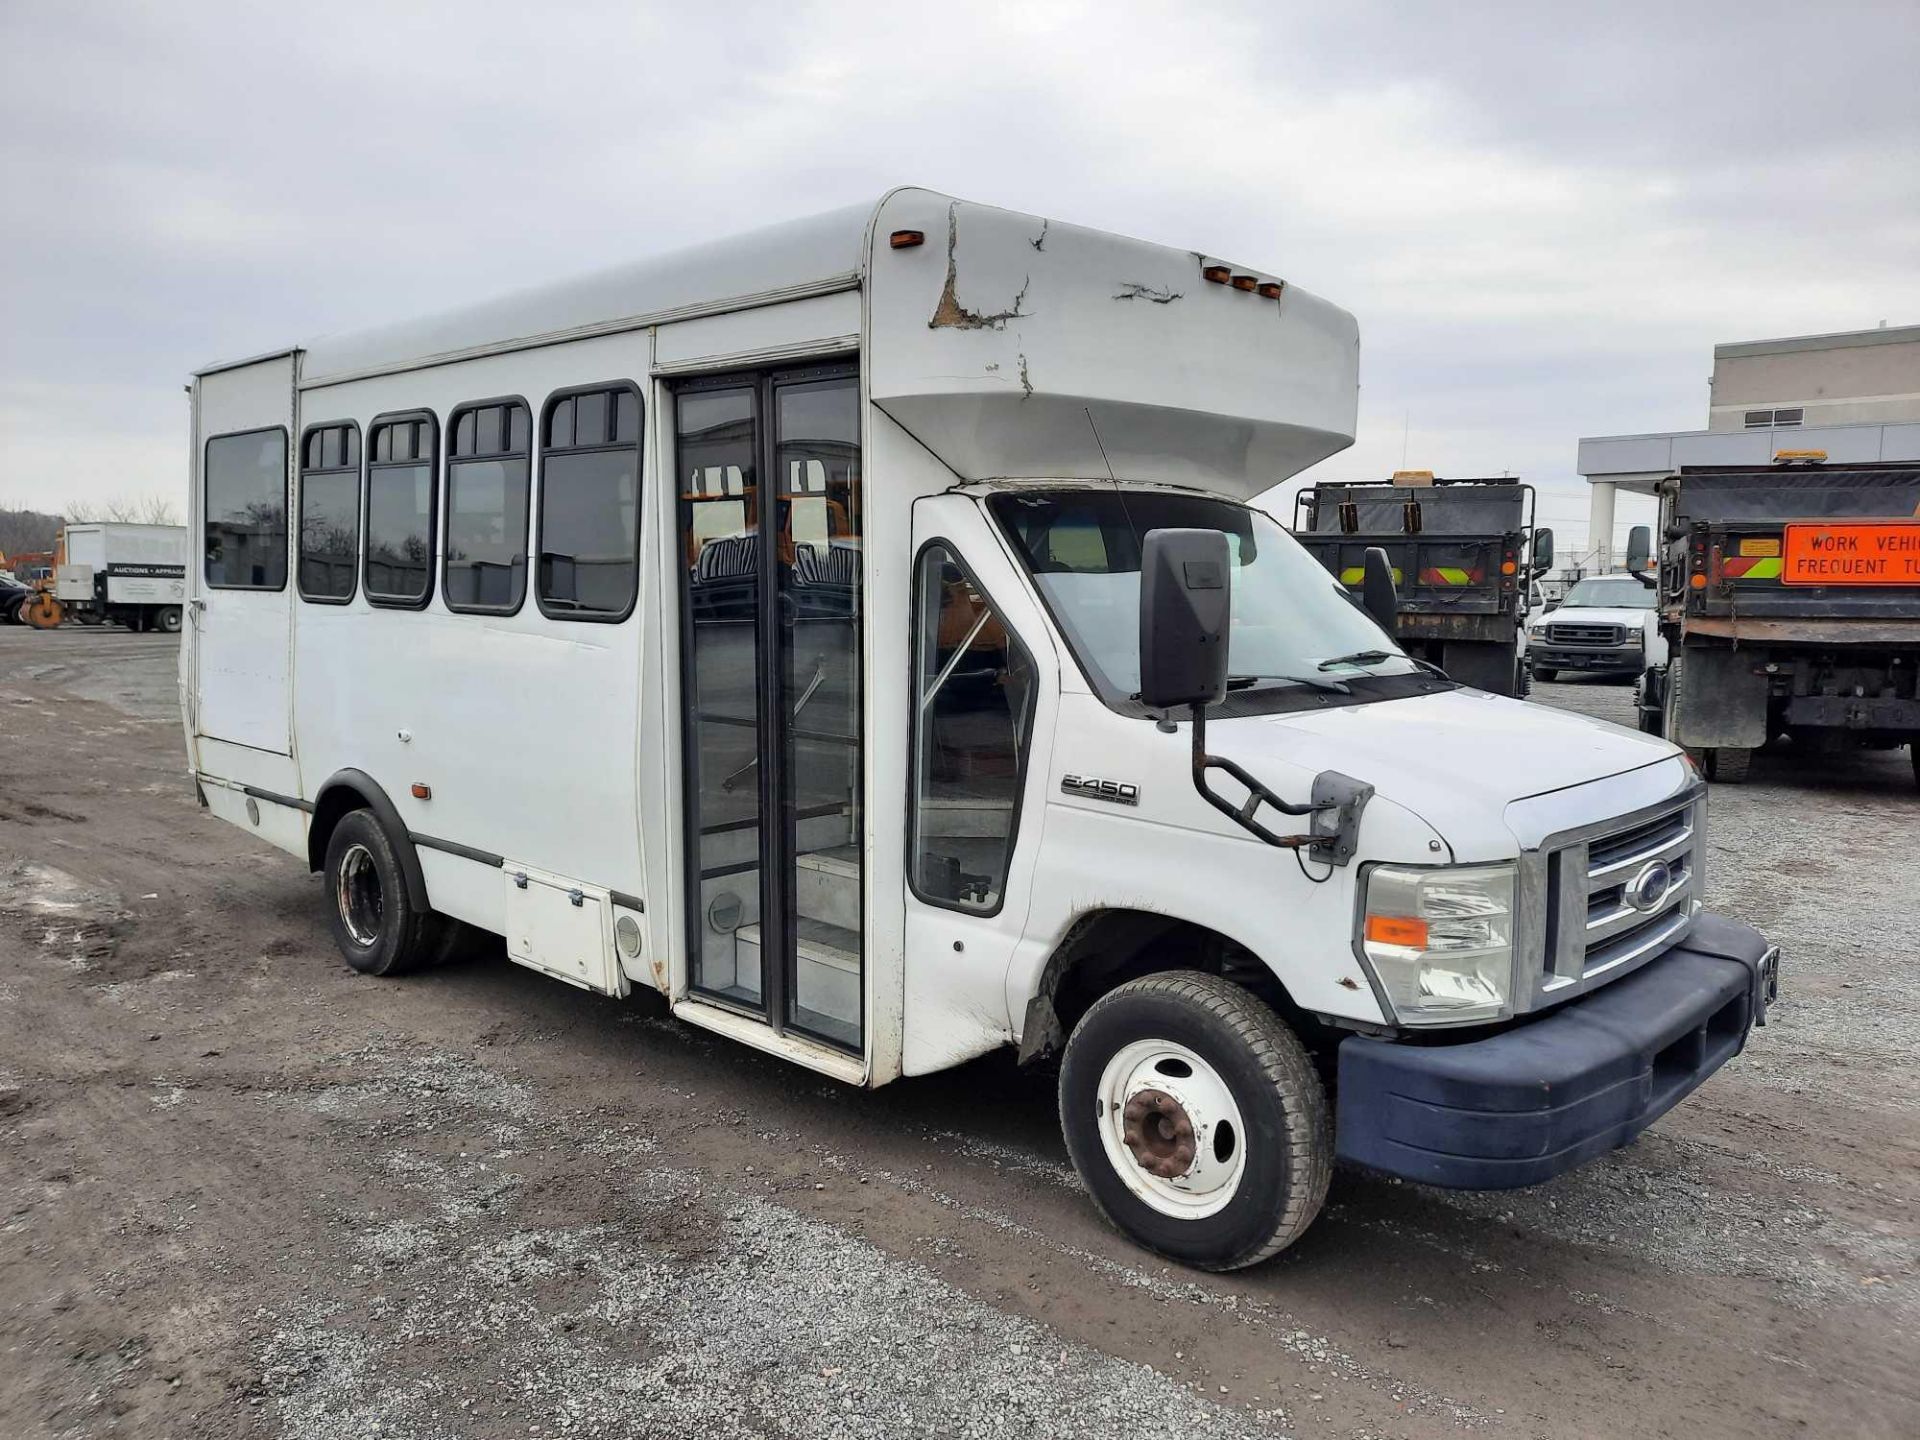 2008 FORD E-450 SHORT BUS - Image 4 of 16